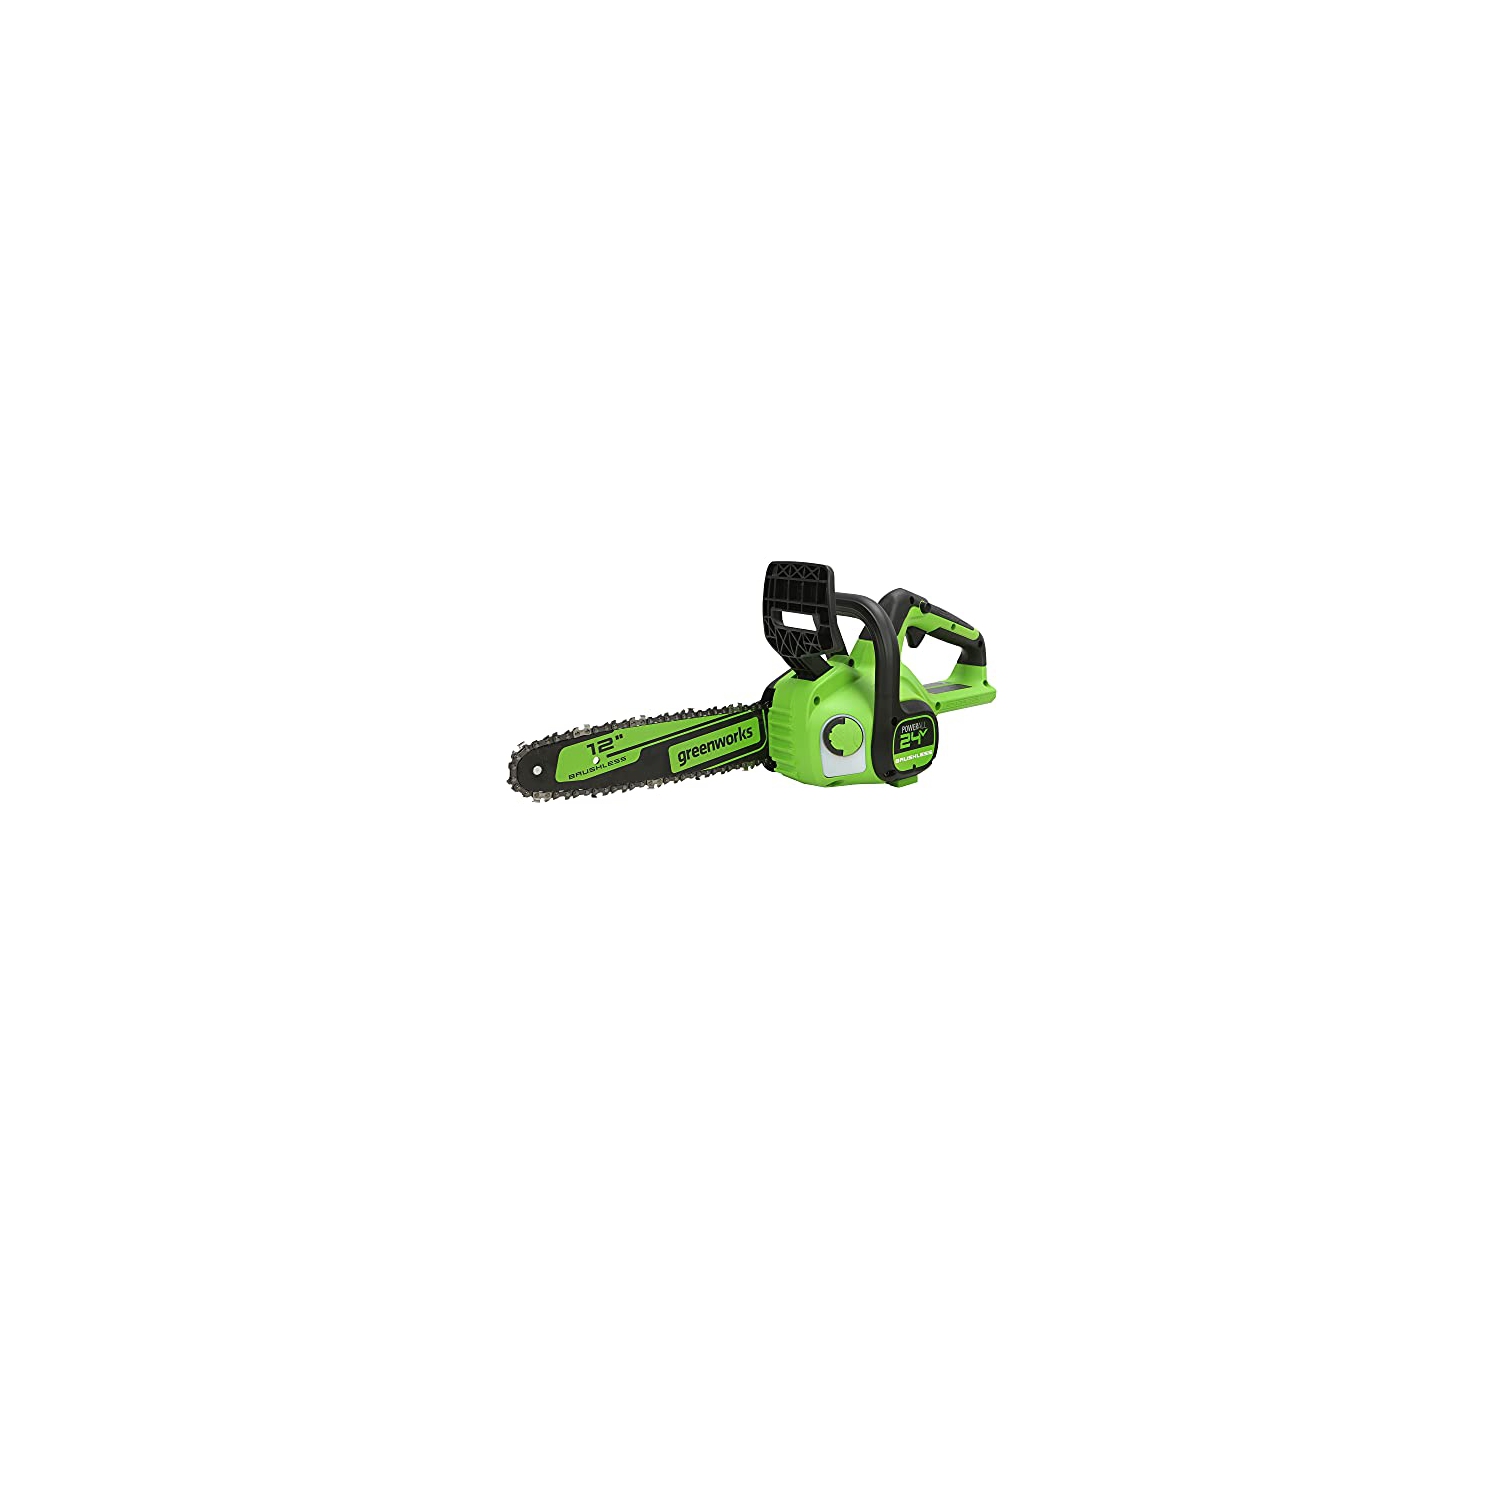 Greenworks 24V 12-inch Brushless Chainsaw, Tool Only